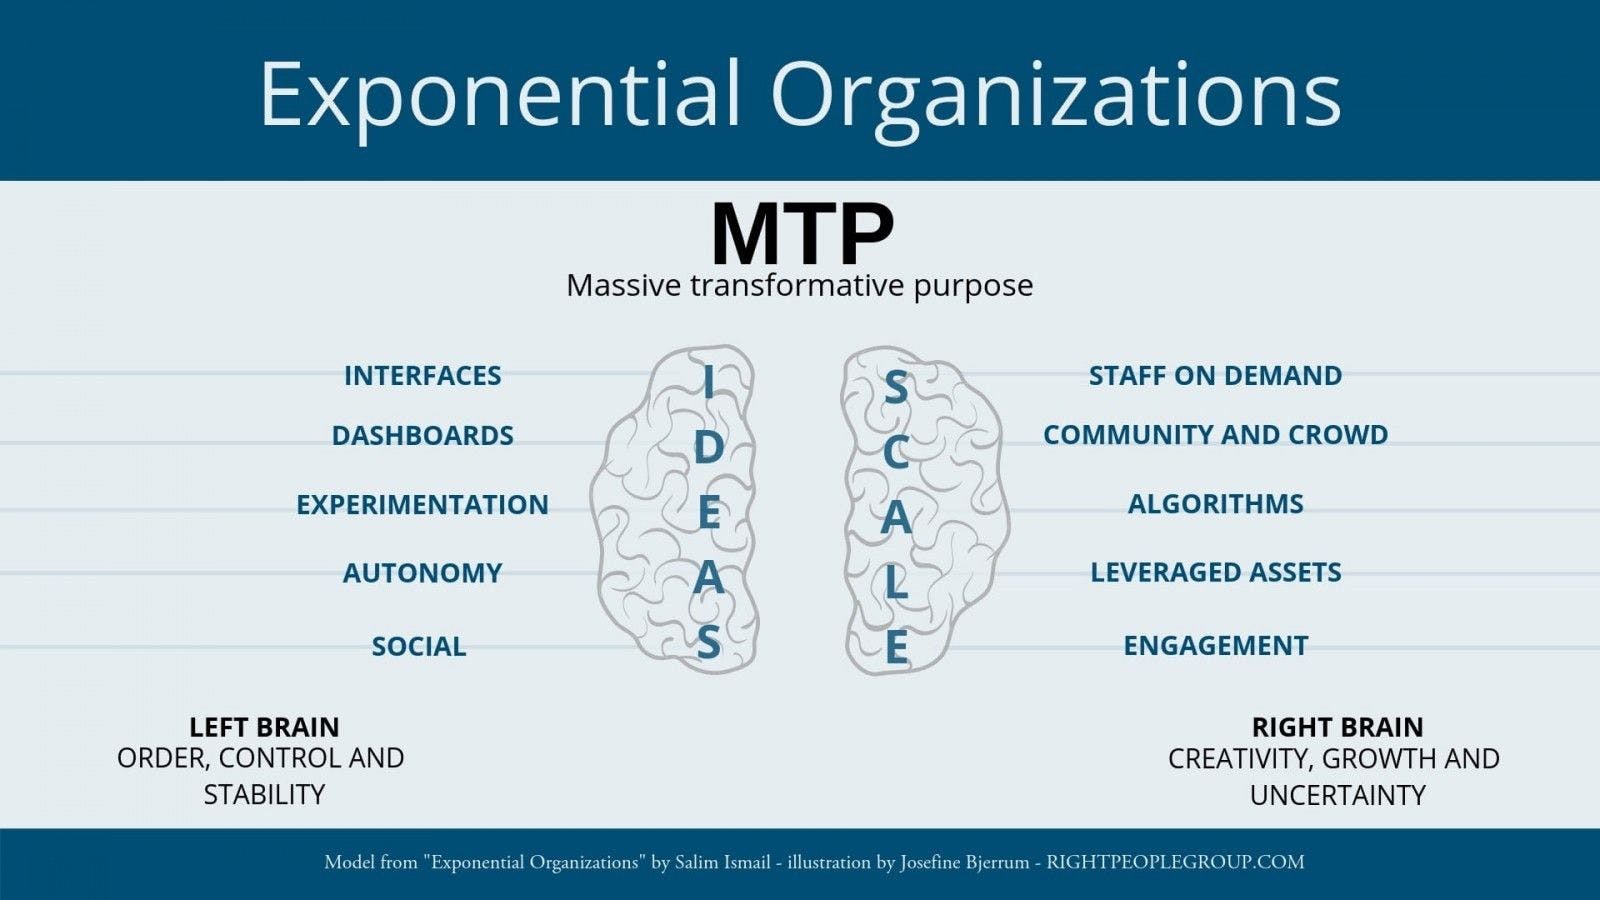 Exponential organizations scale and ideas by Salim Ismail